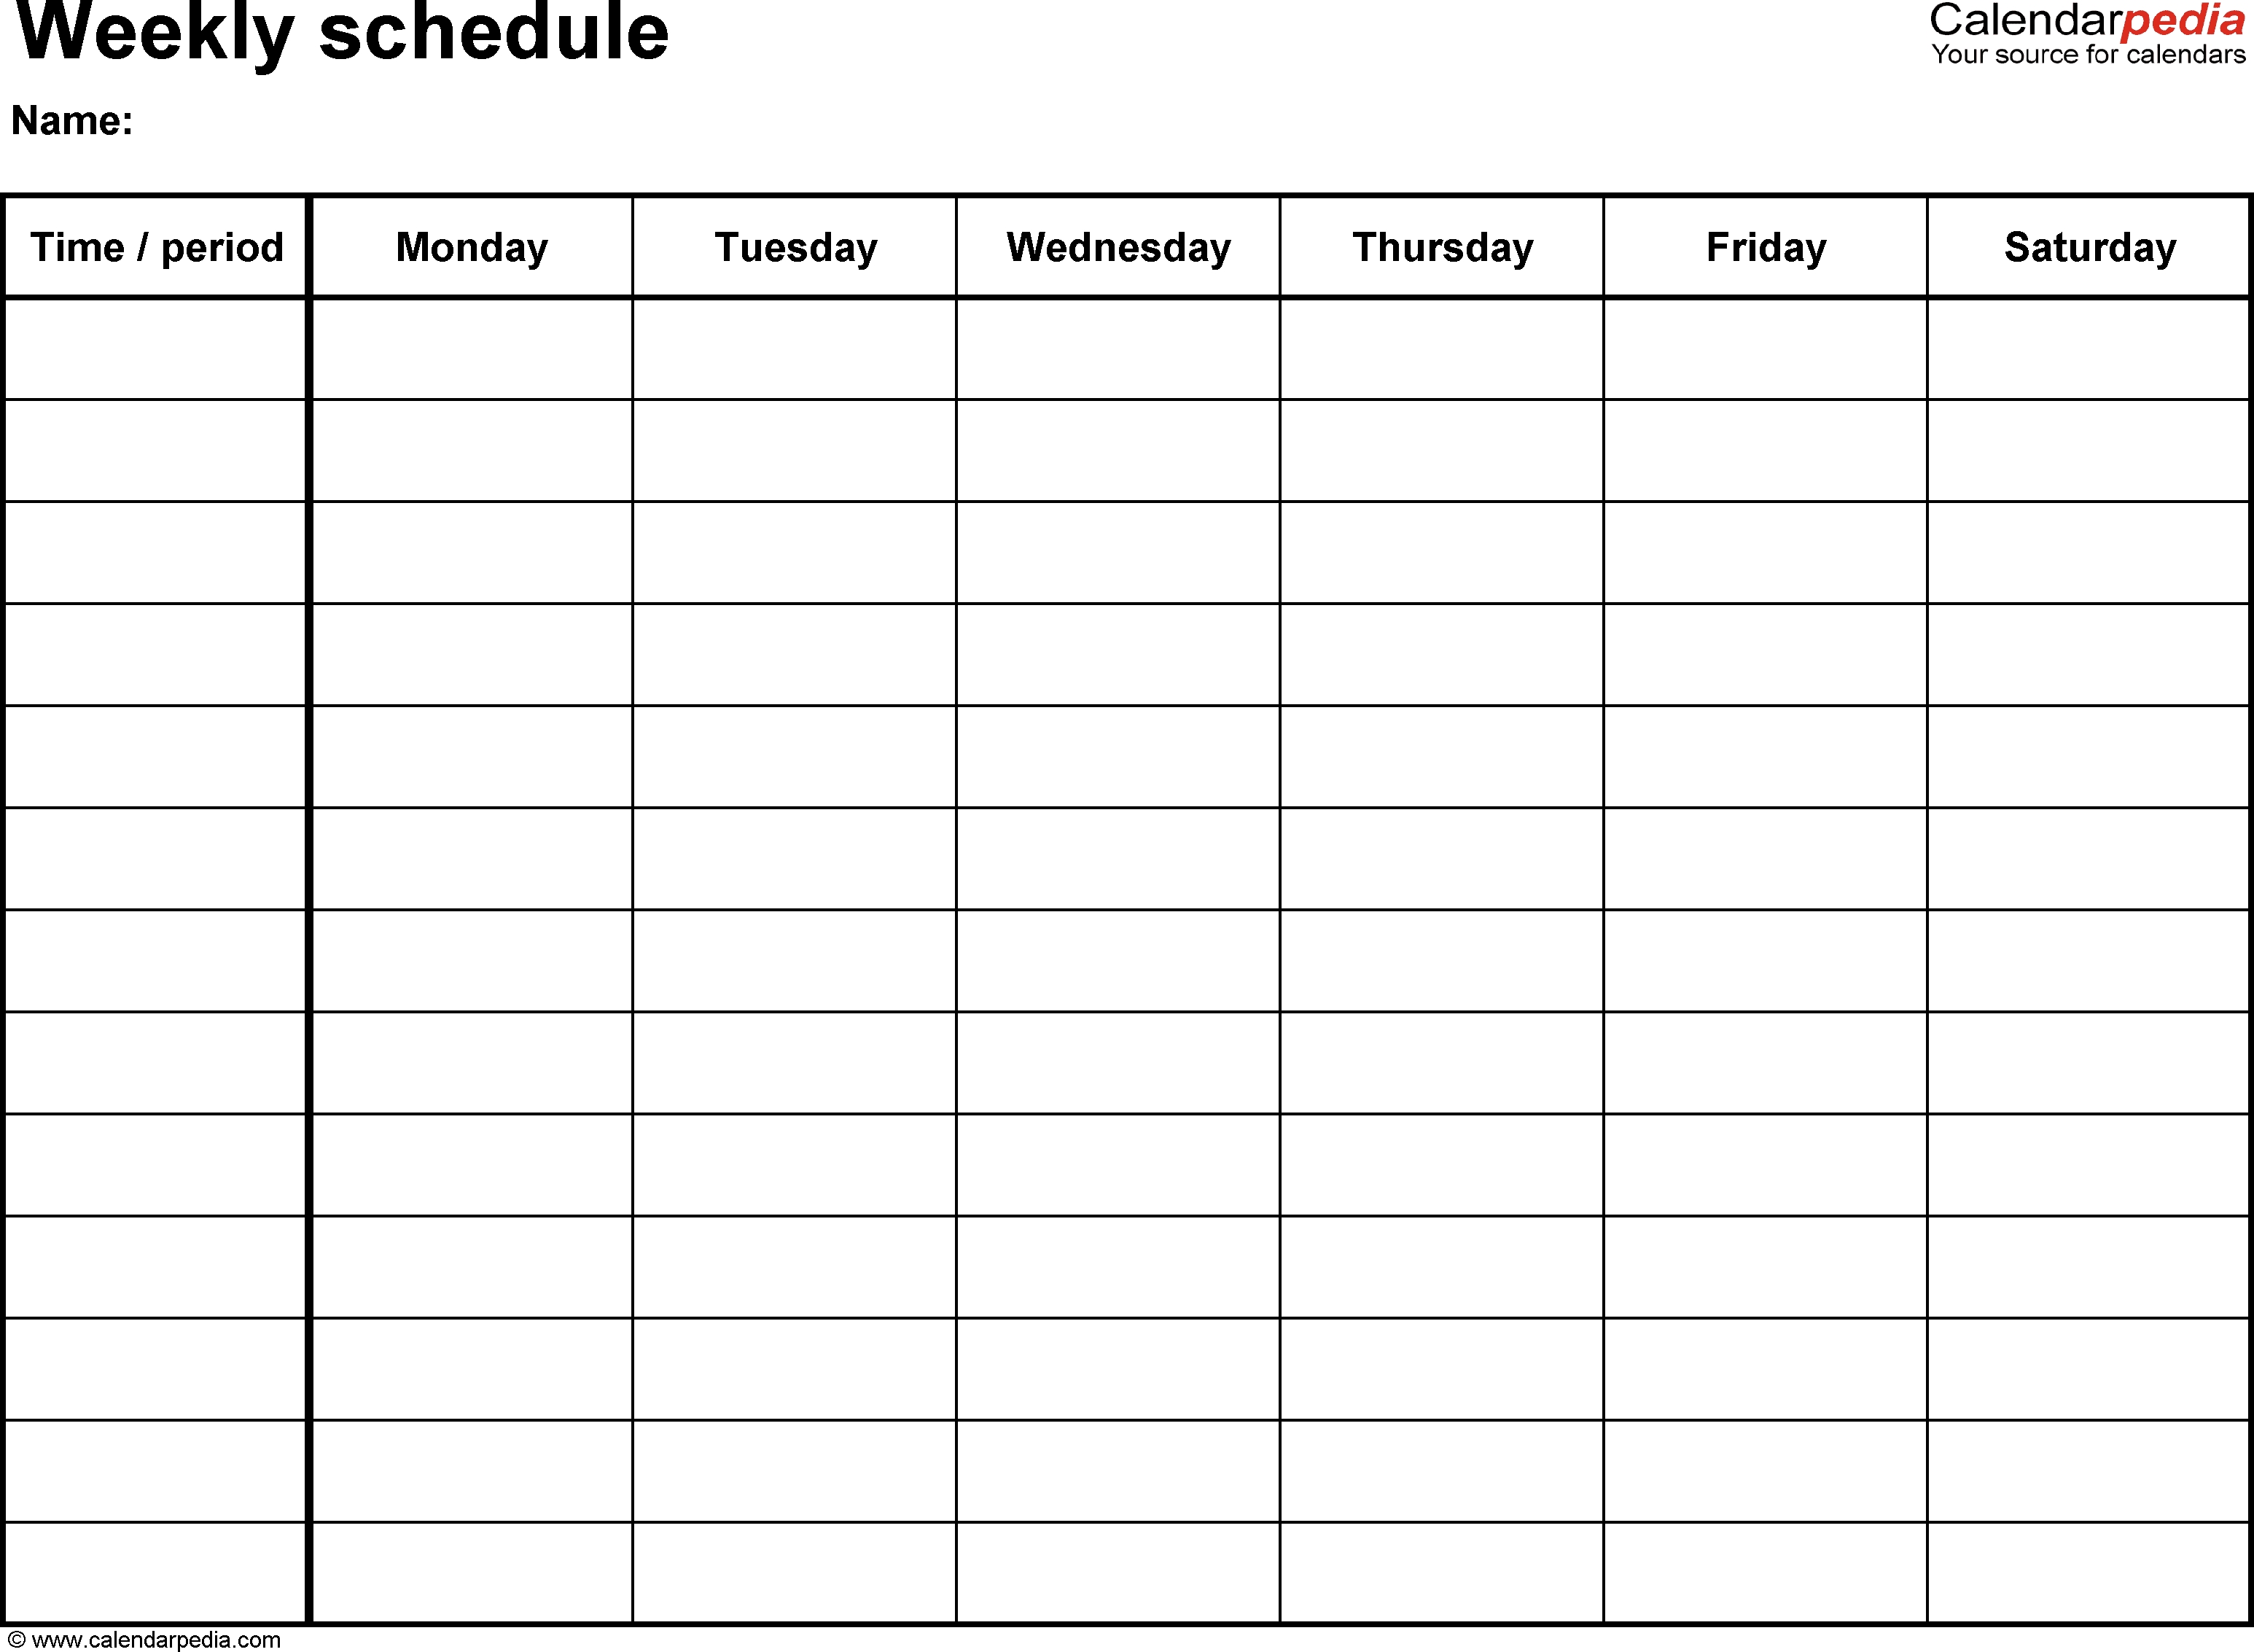 Free Weekly Schedule Templates For Excel - 18 Templates with Printable Blank 12 Week Calendar Template